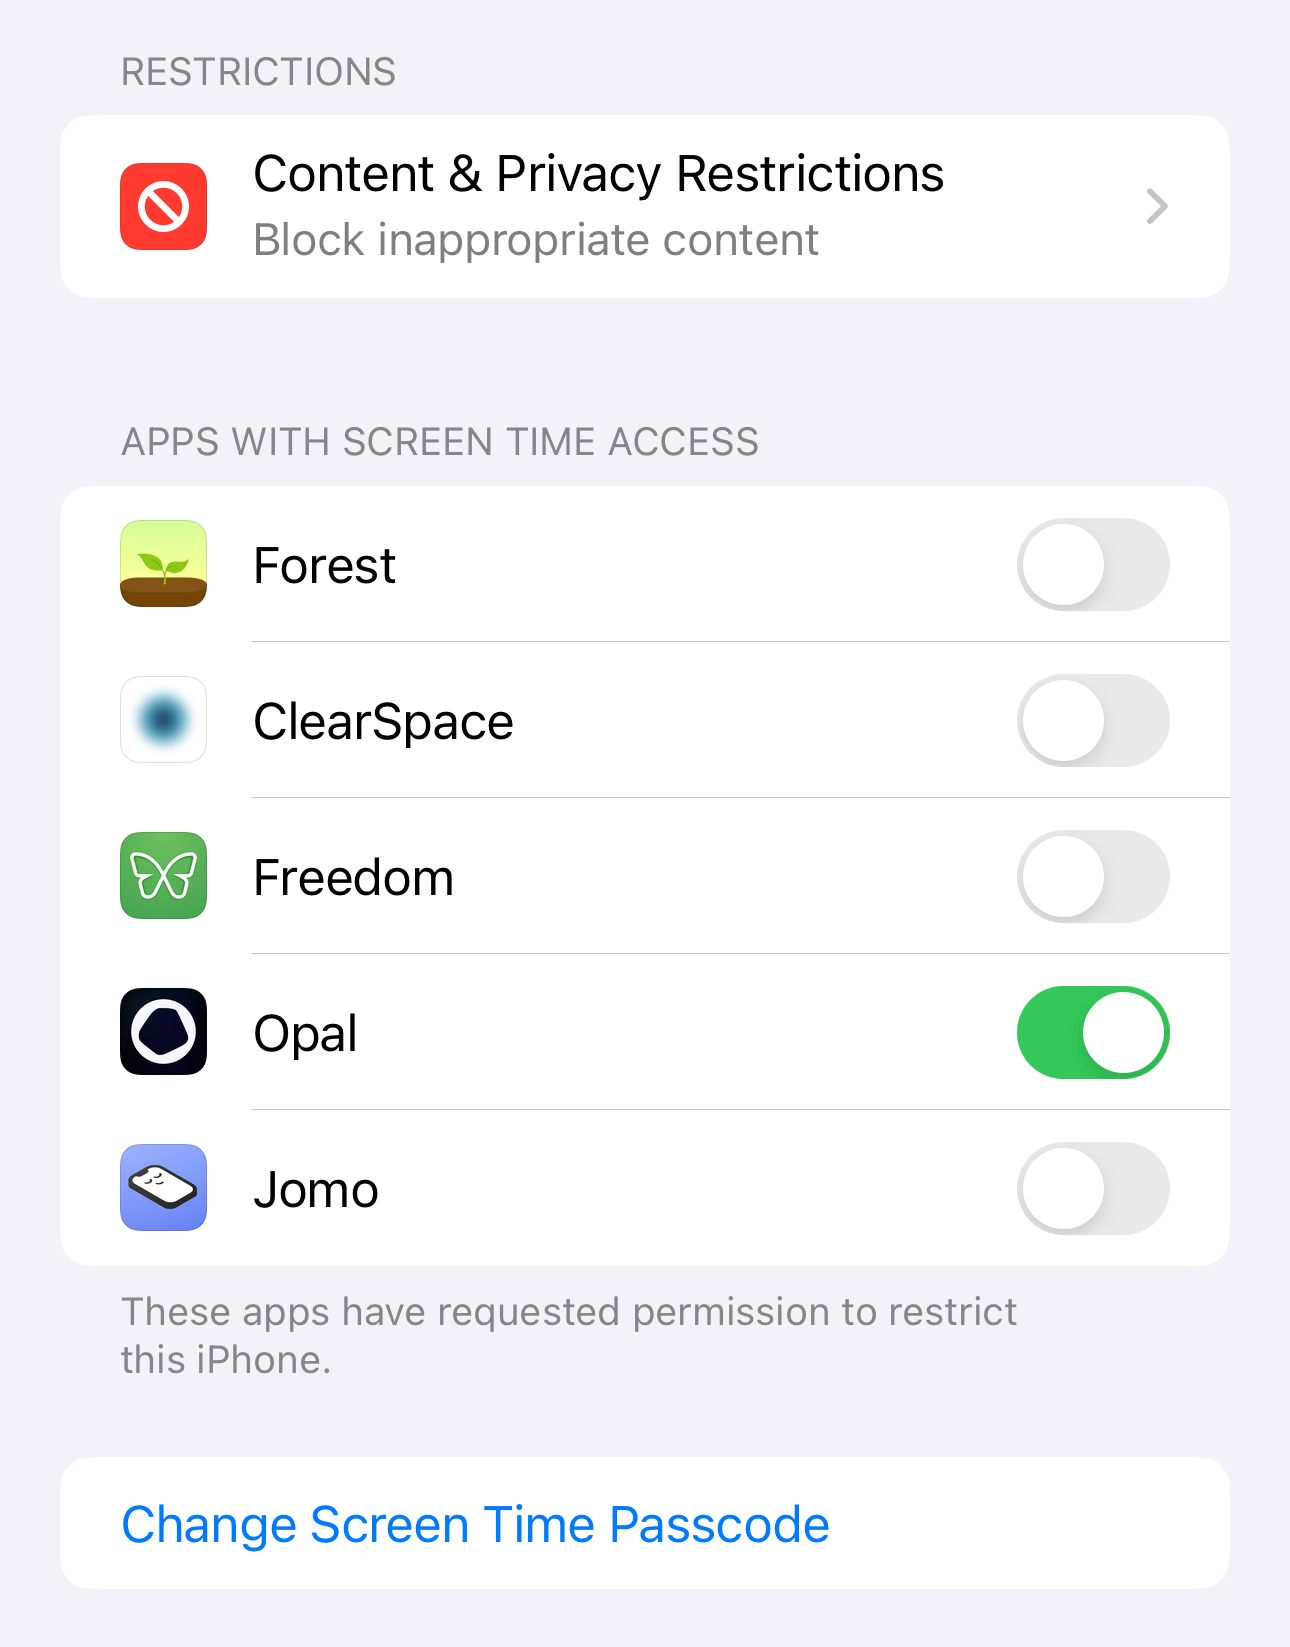 Third-party Screen Time apps can be disabled by toggling off "Apps with Screen Time Access"